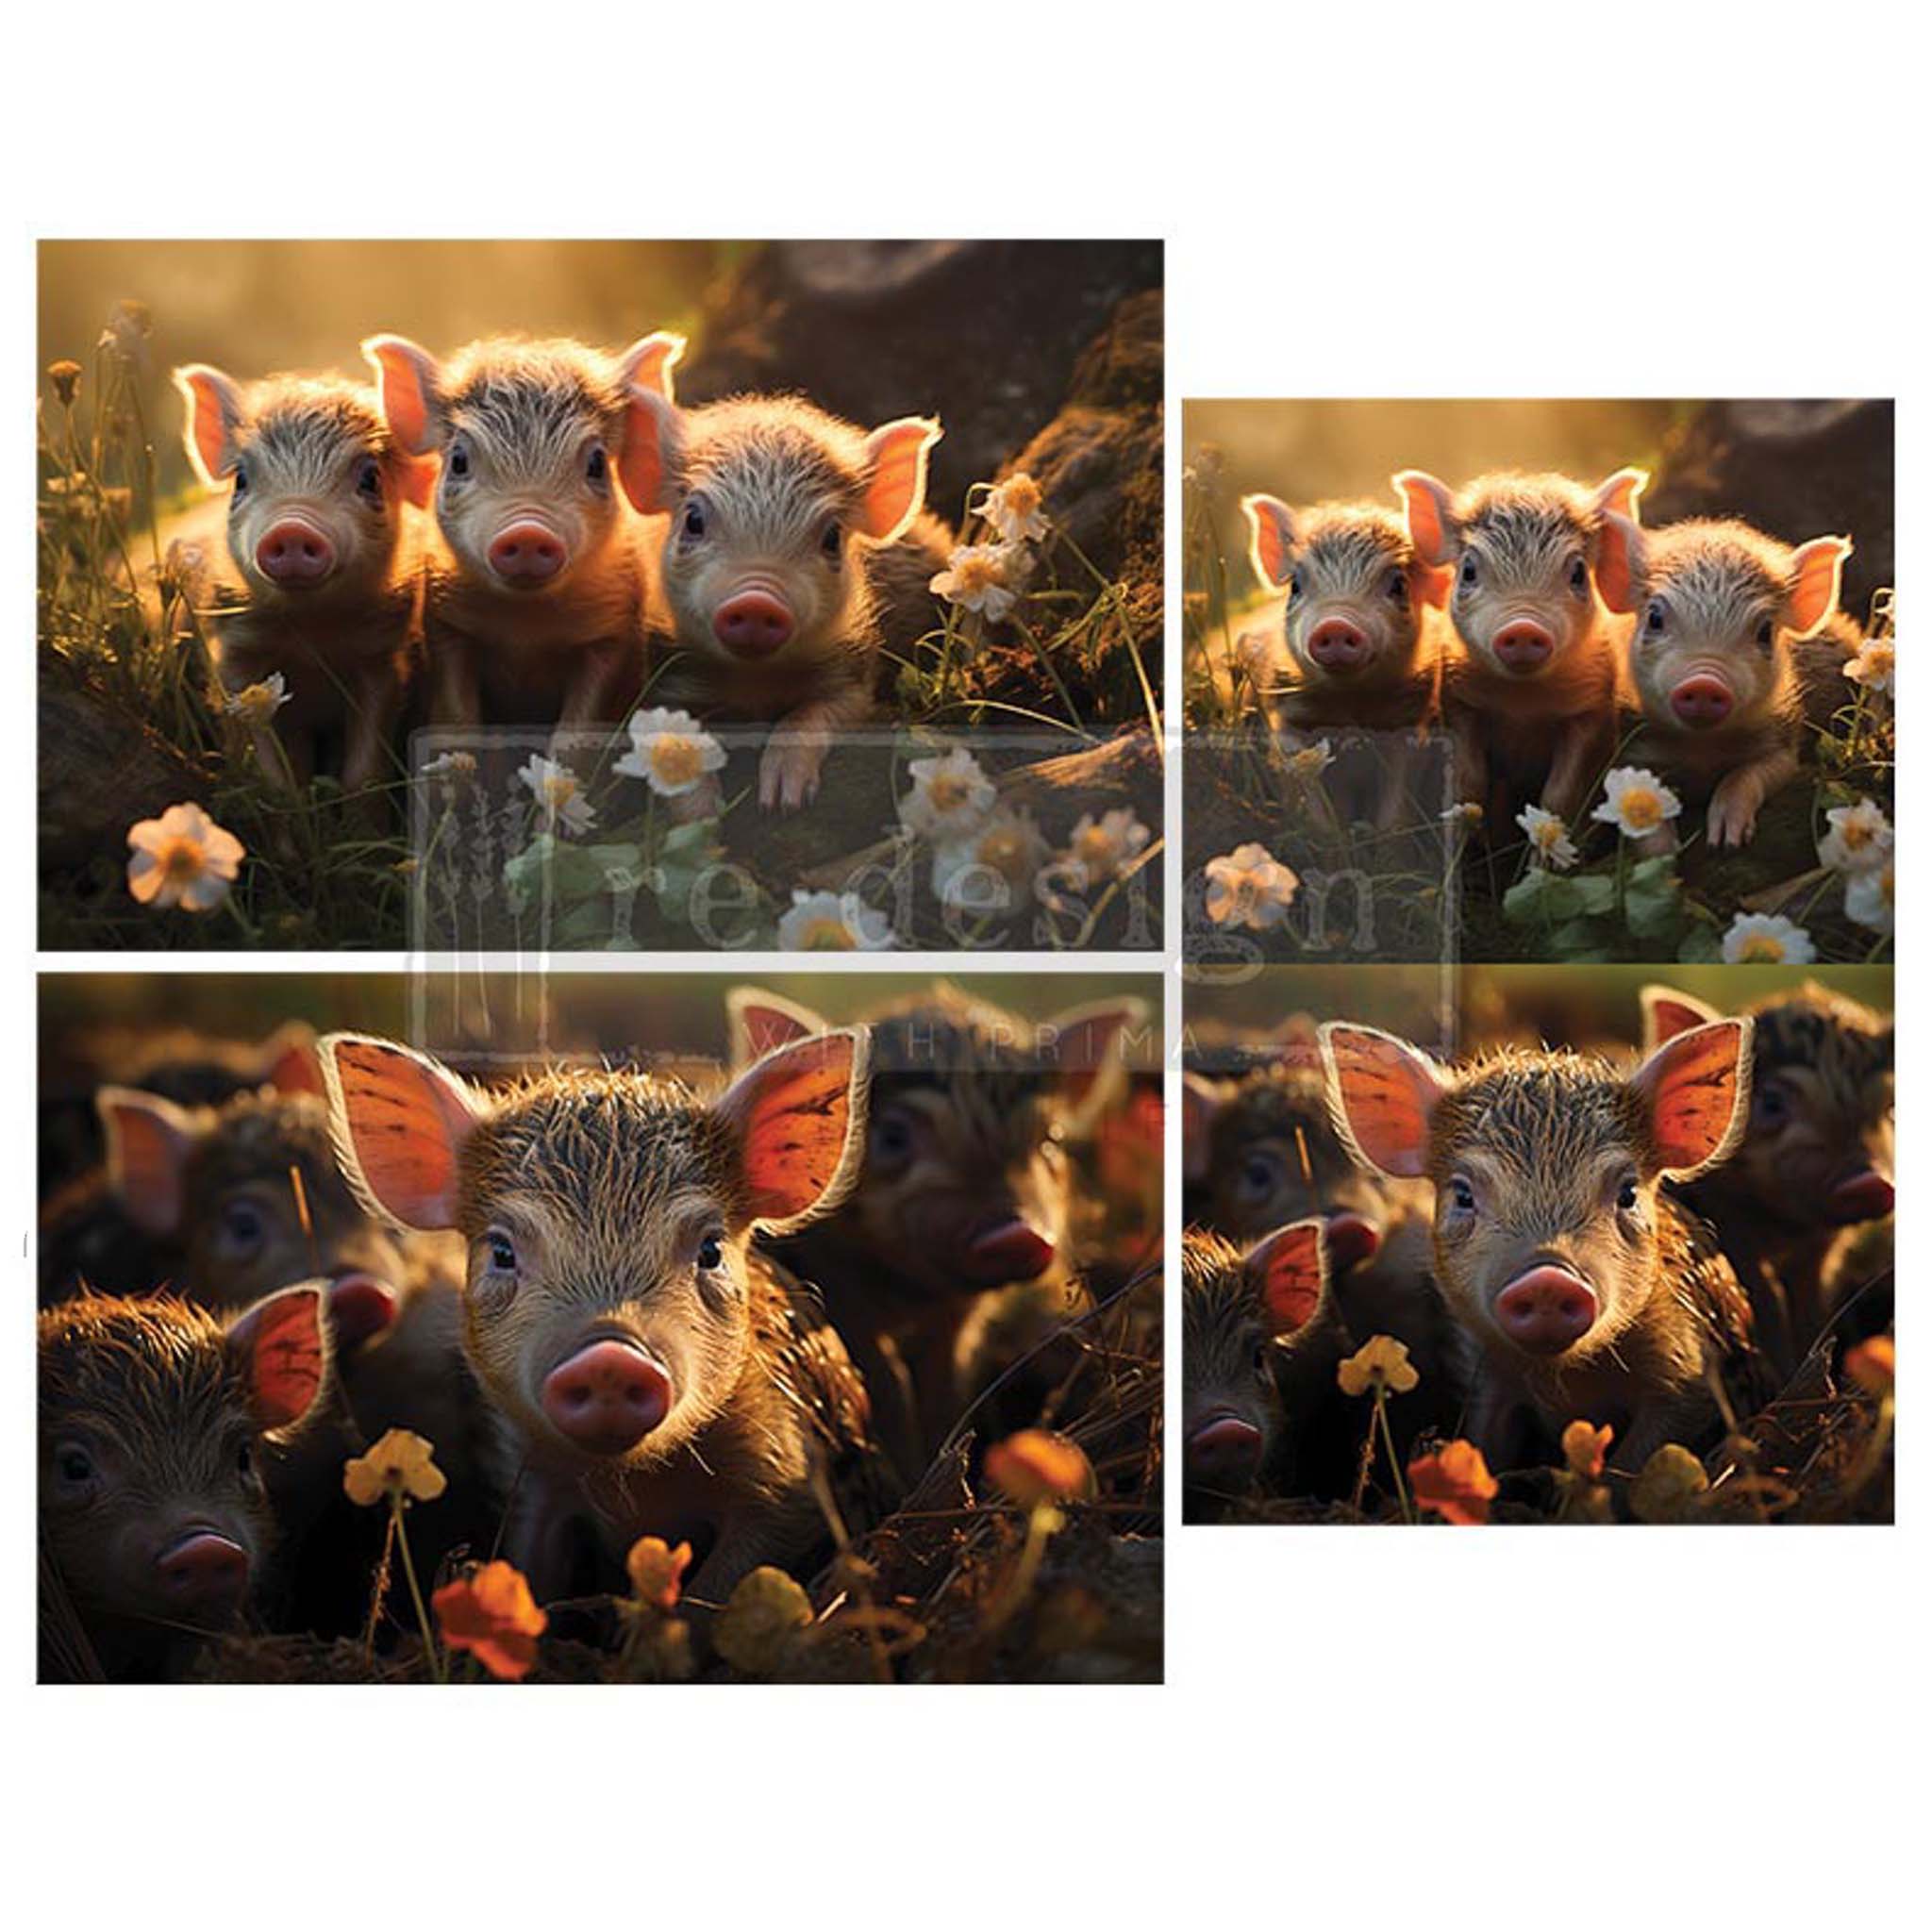 Three tissue paper designs that feature adorable pink piglets basking in the sunlight are against a white background.